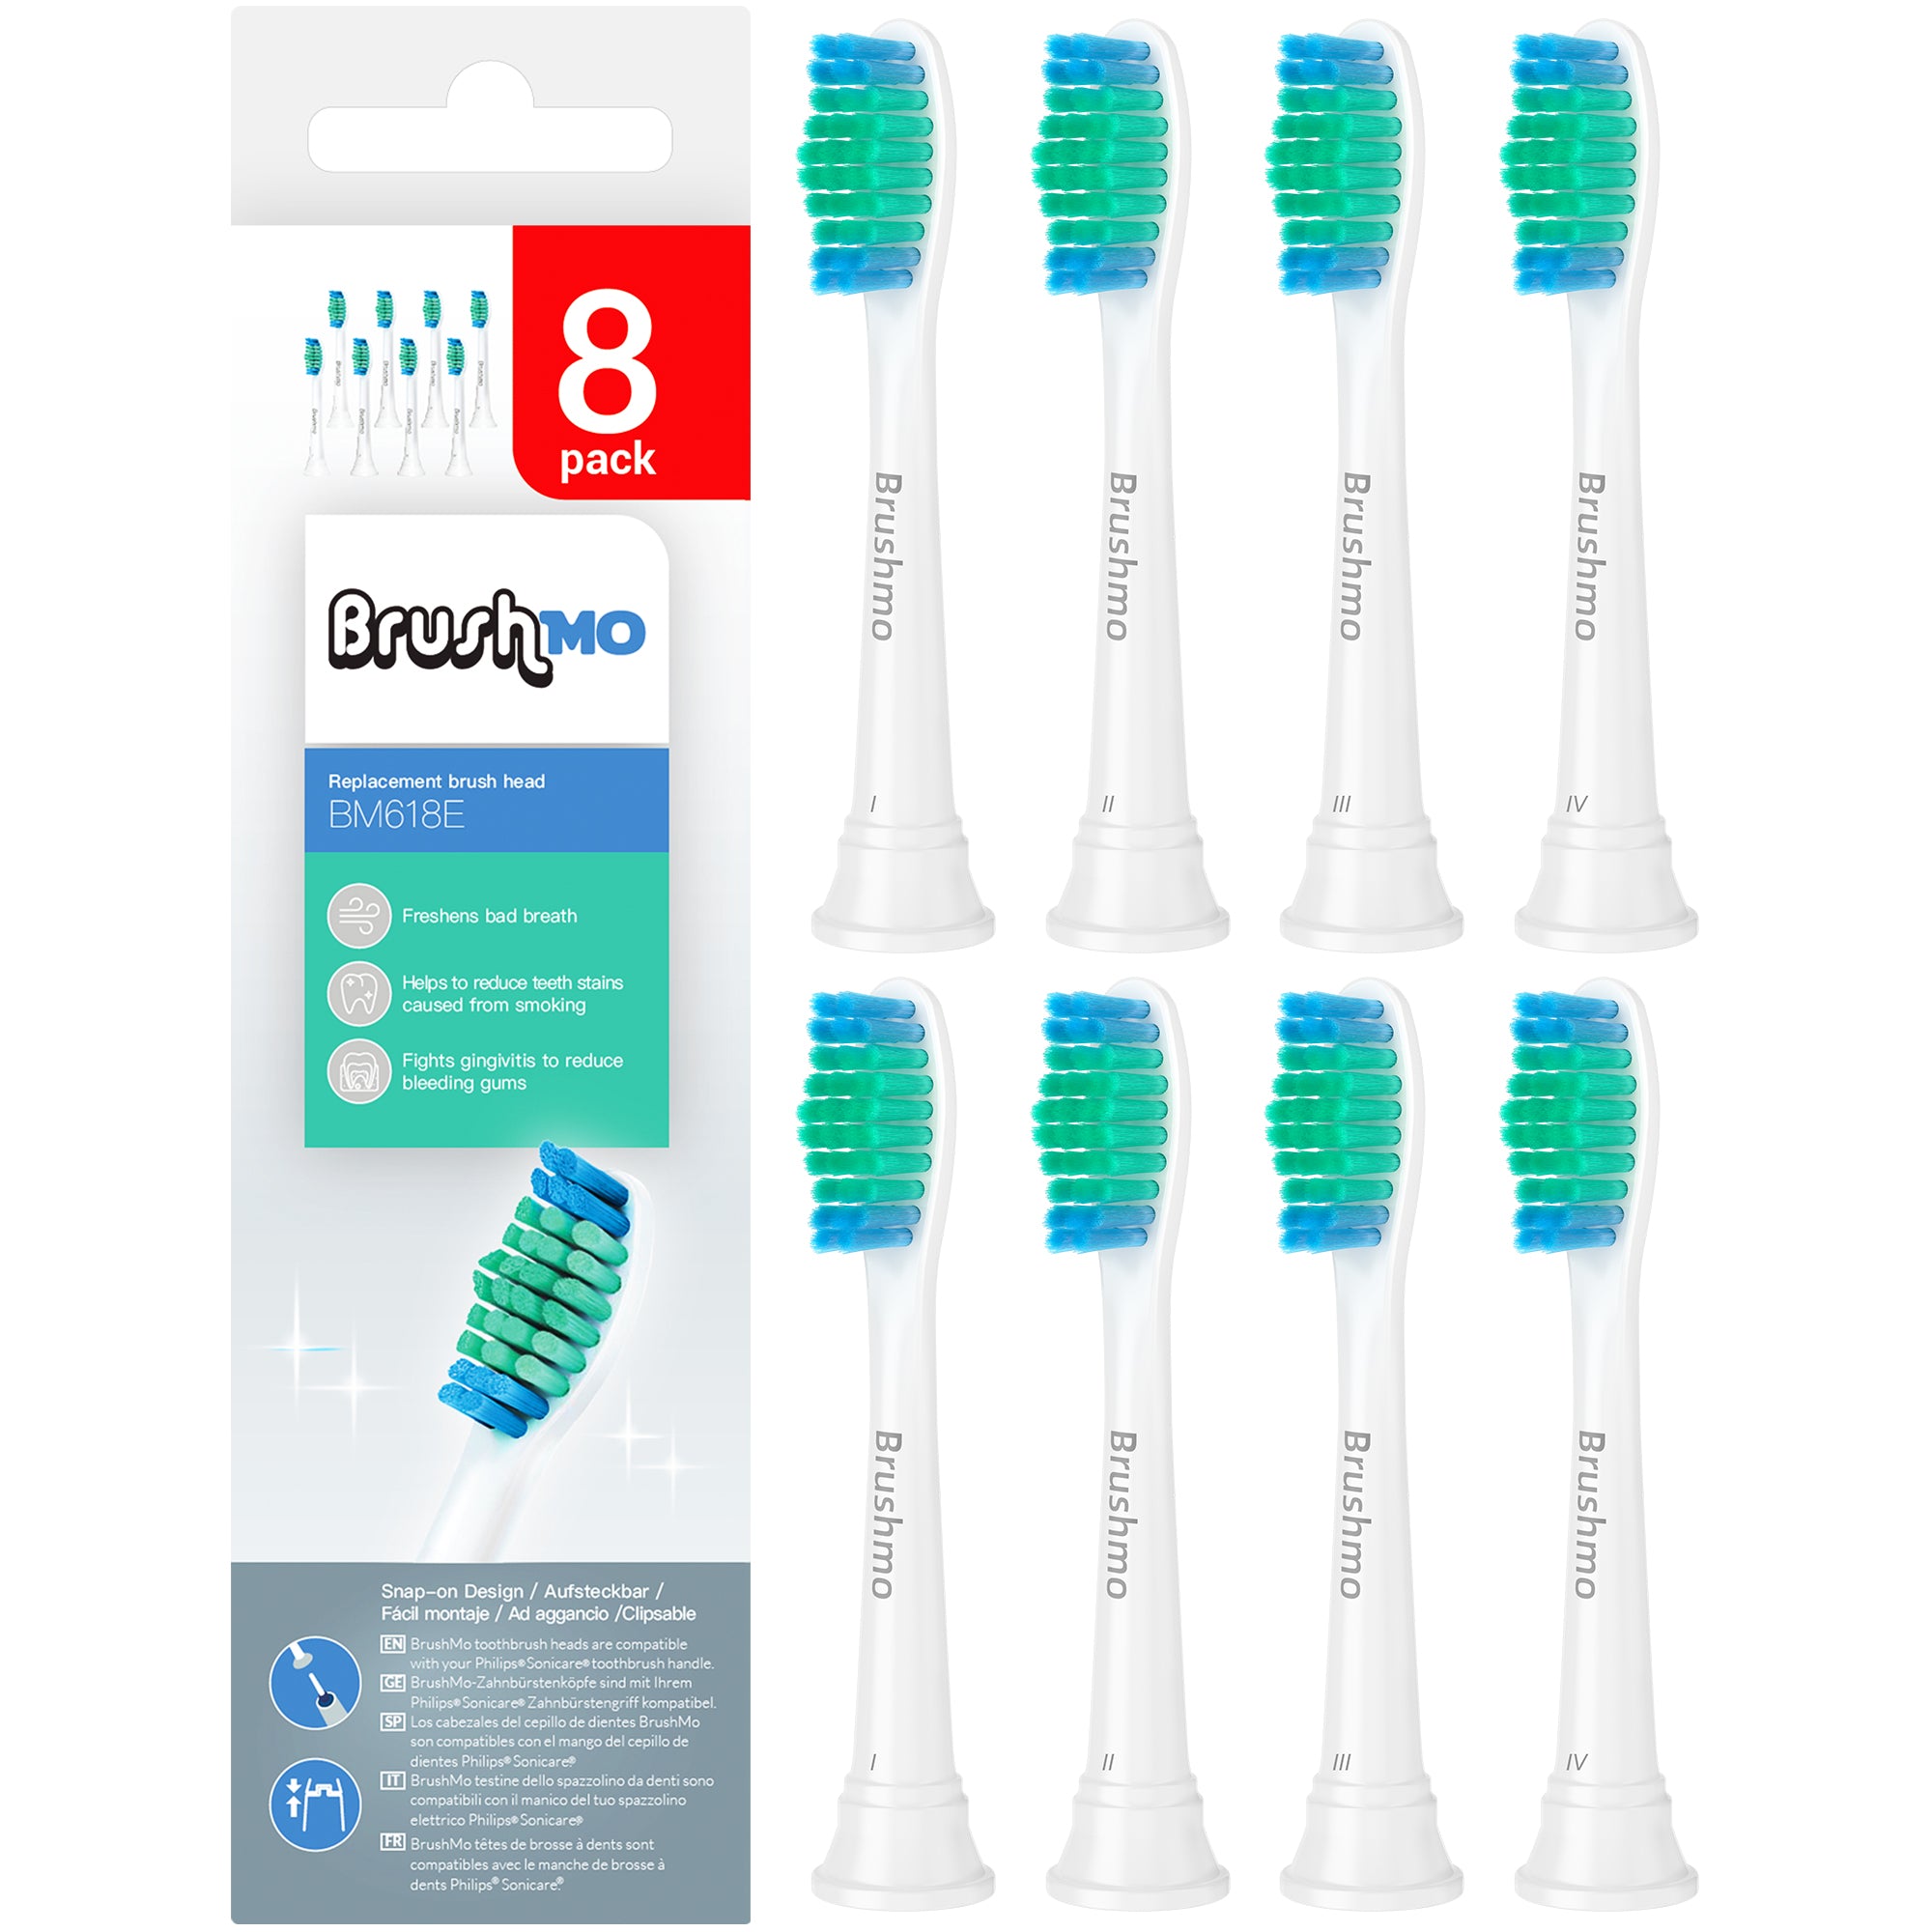 Replacement Toothbrush Heads Compatible with Phillips Sonicare Electric Toothbrush HX6013/HX6015, 8 Pack